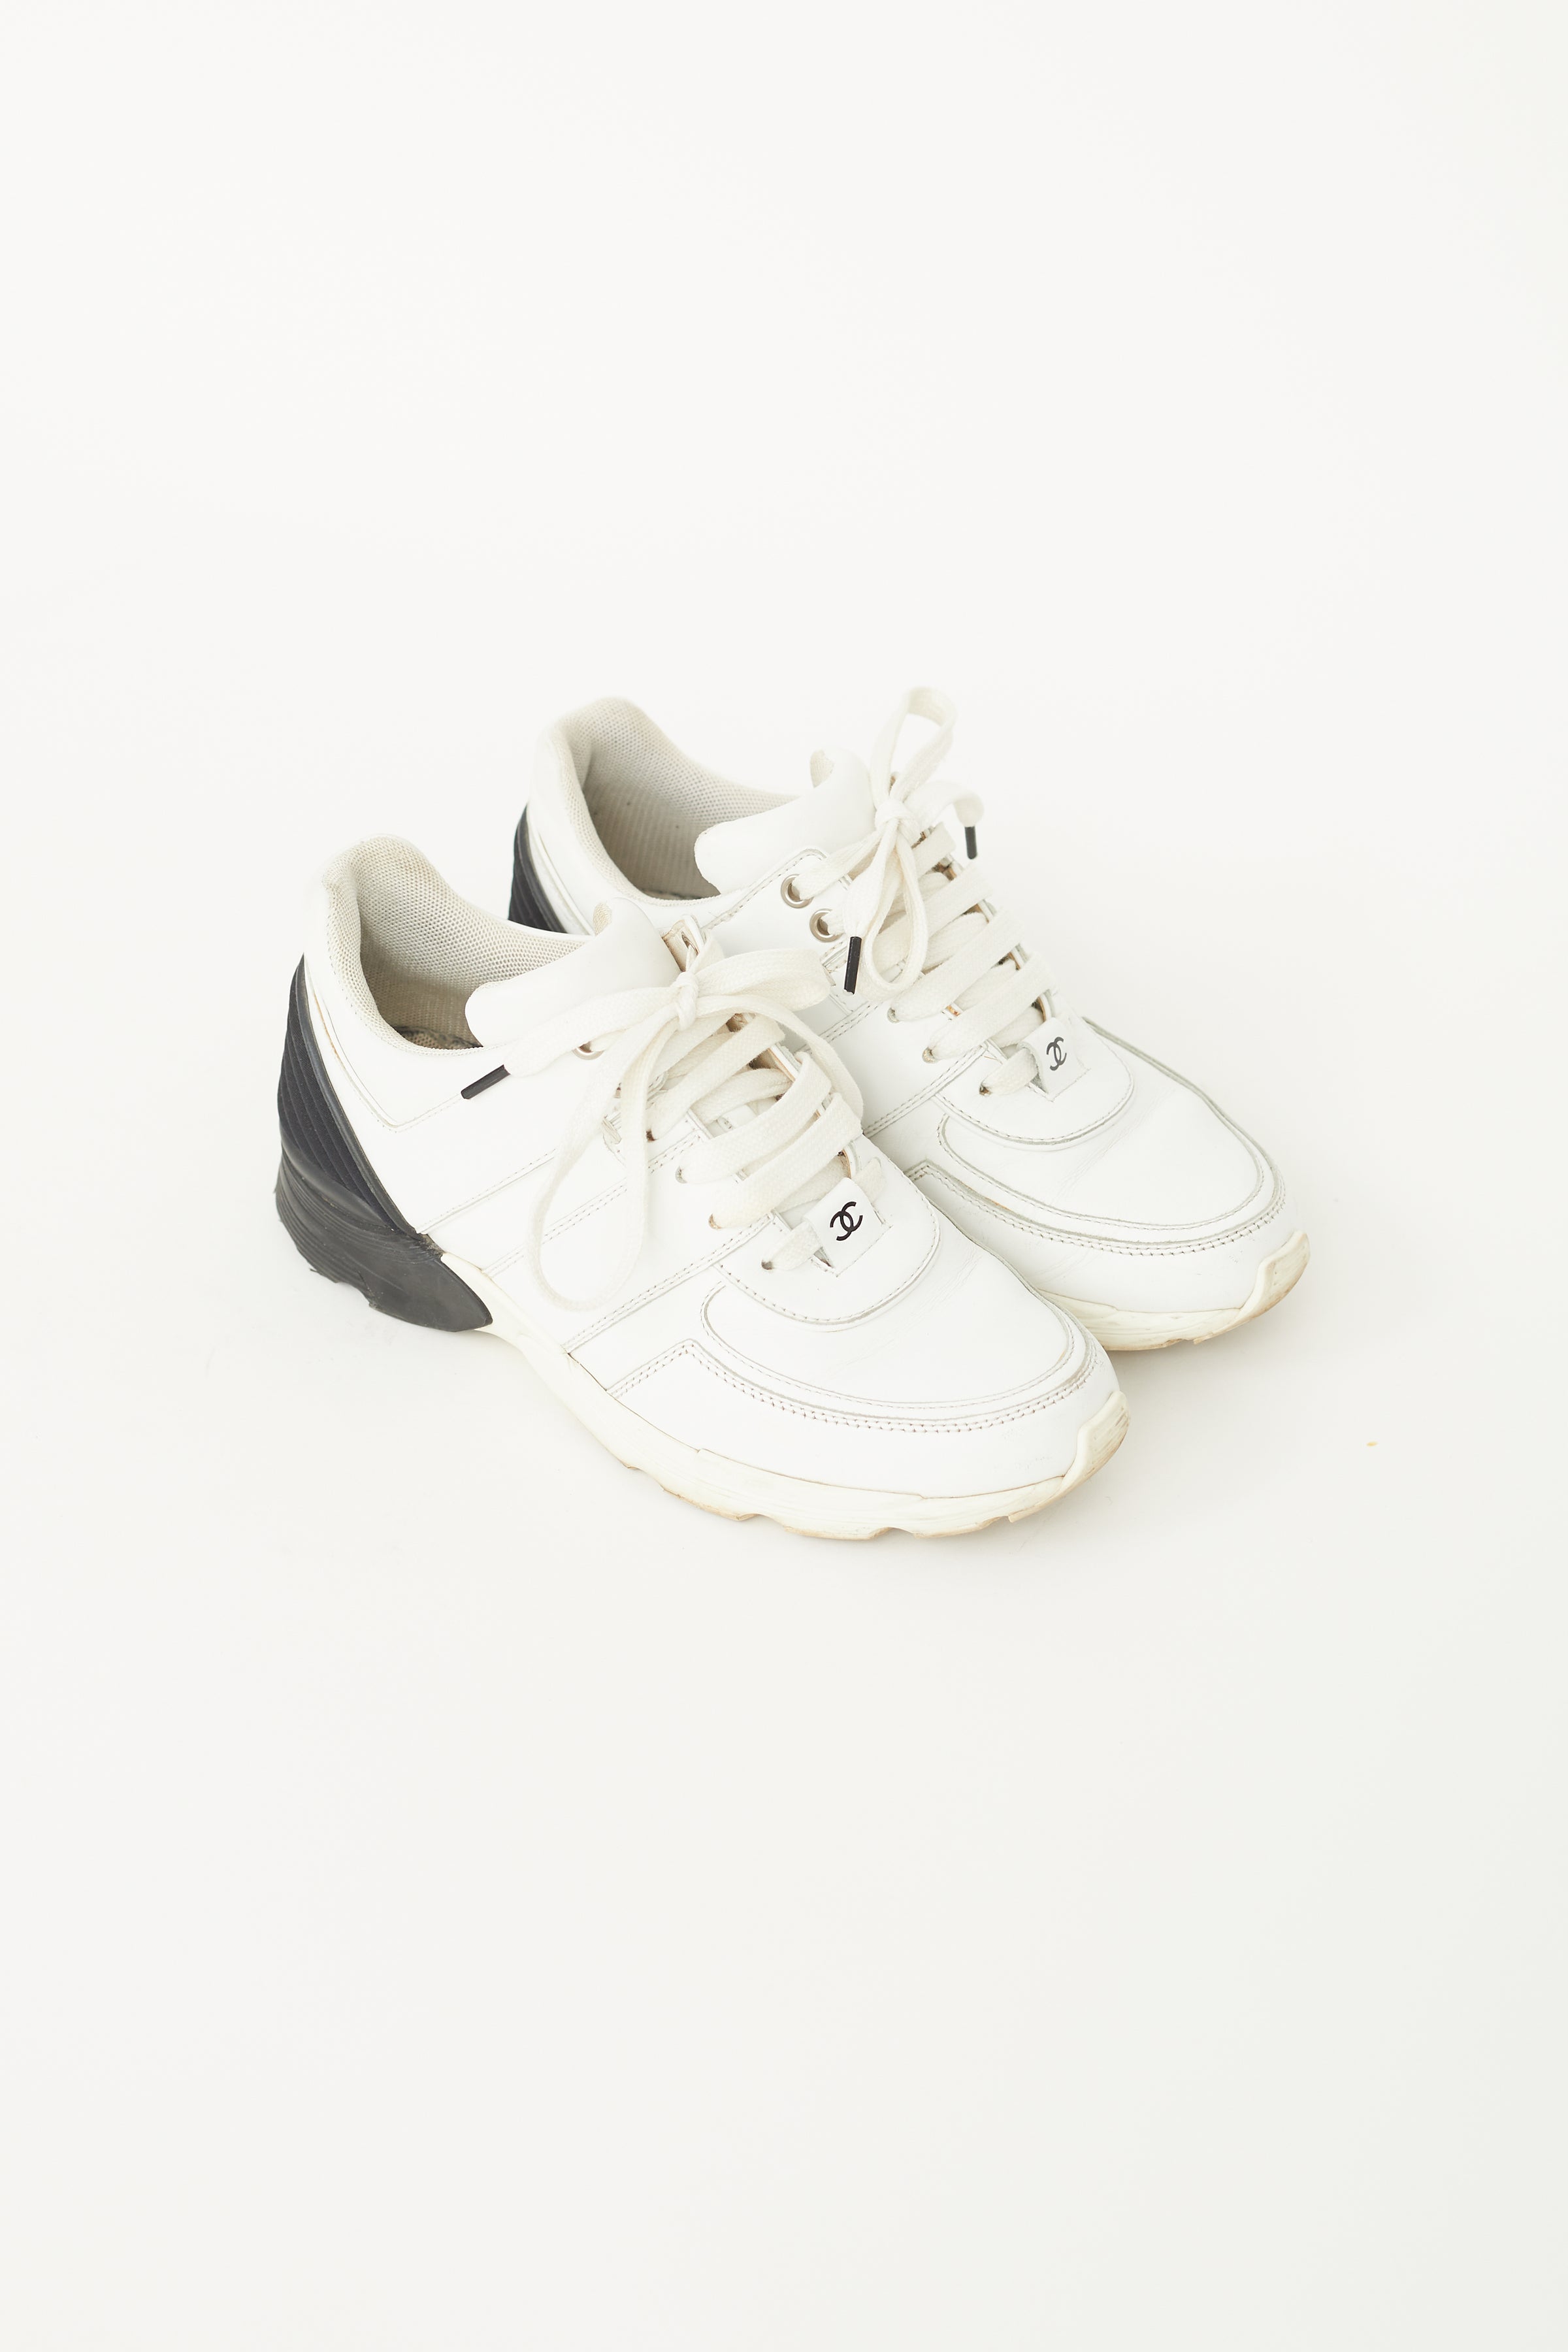 Chanel White Sneakers - LVLENKA Luxury Consignment